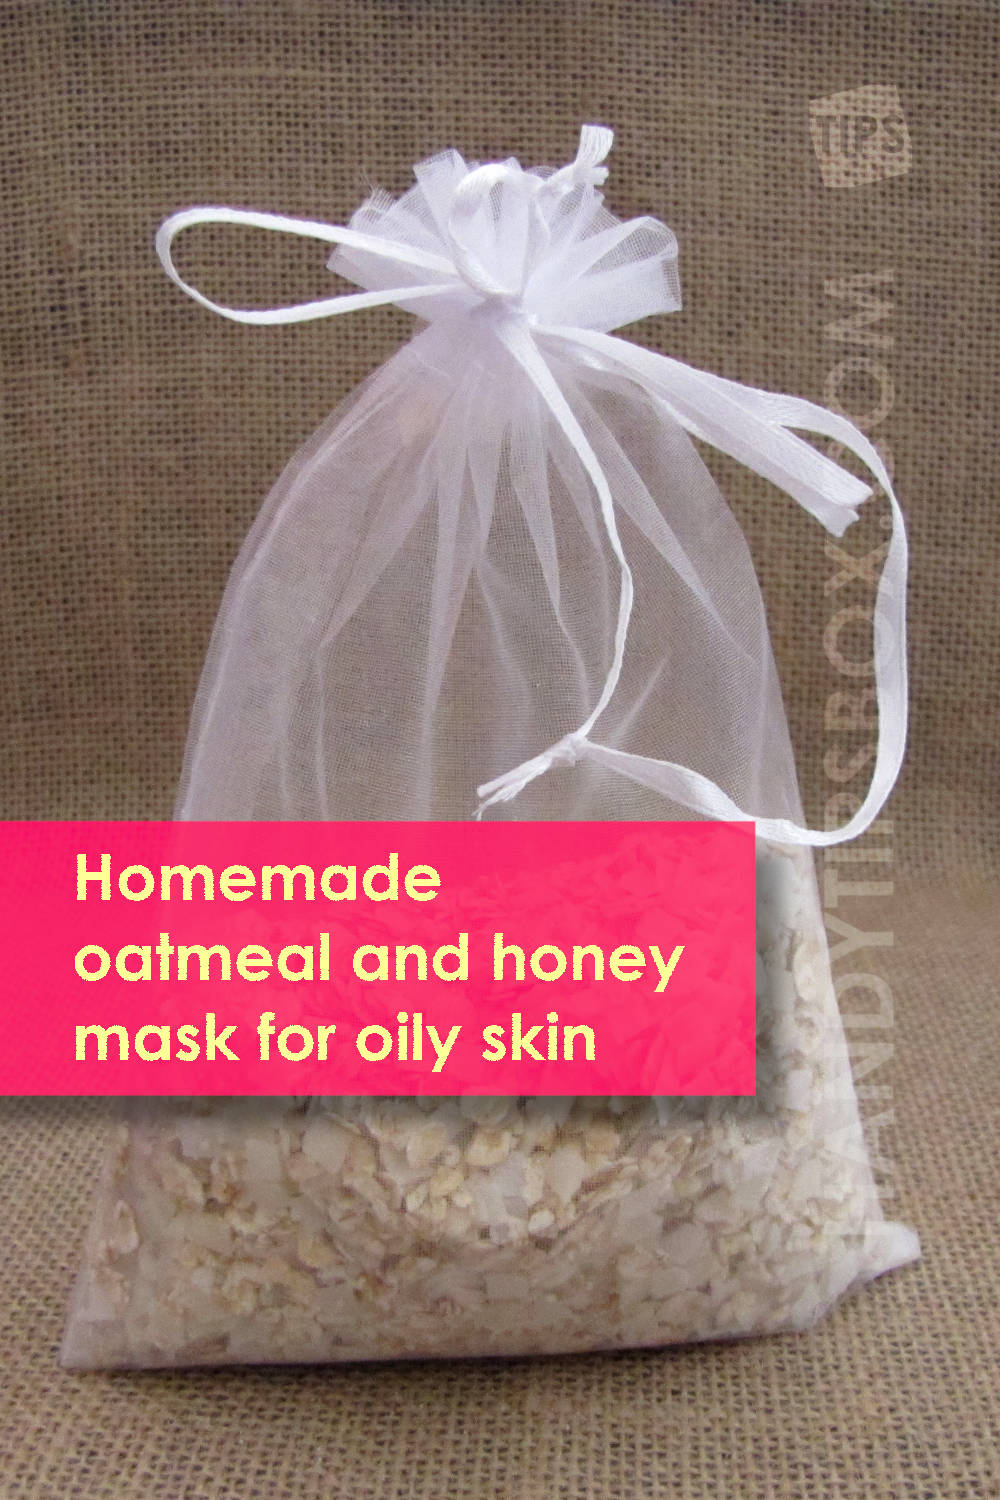 An effective homemade oatmeal and honey mask for oily skin. Ingredients - oatmeal in a soft bag.